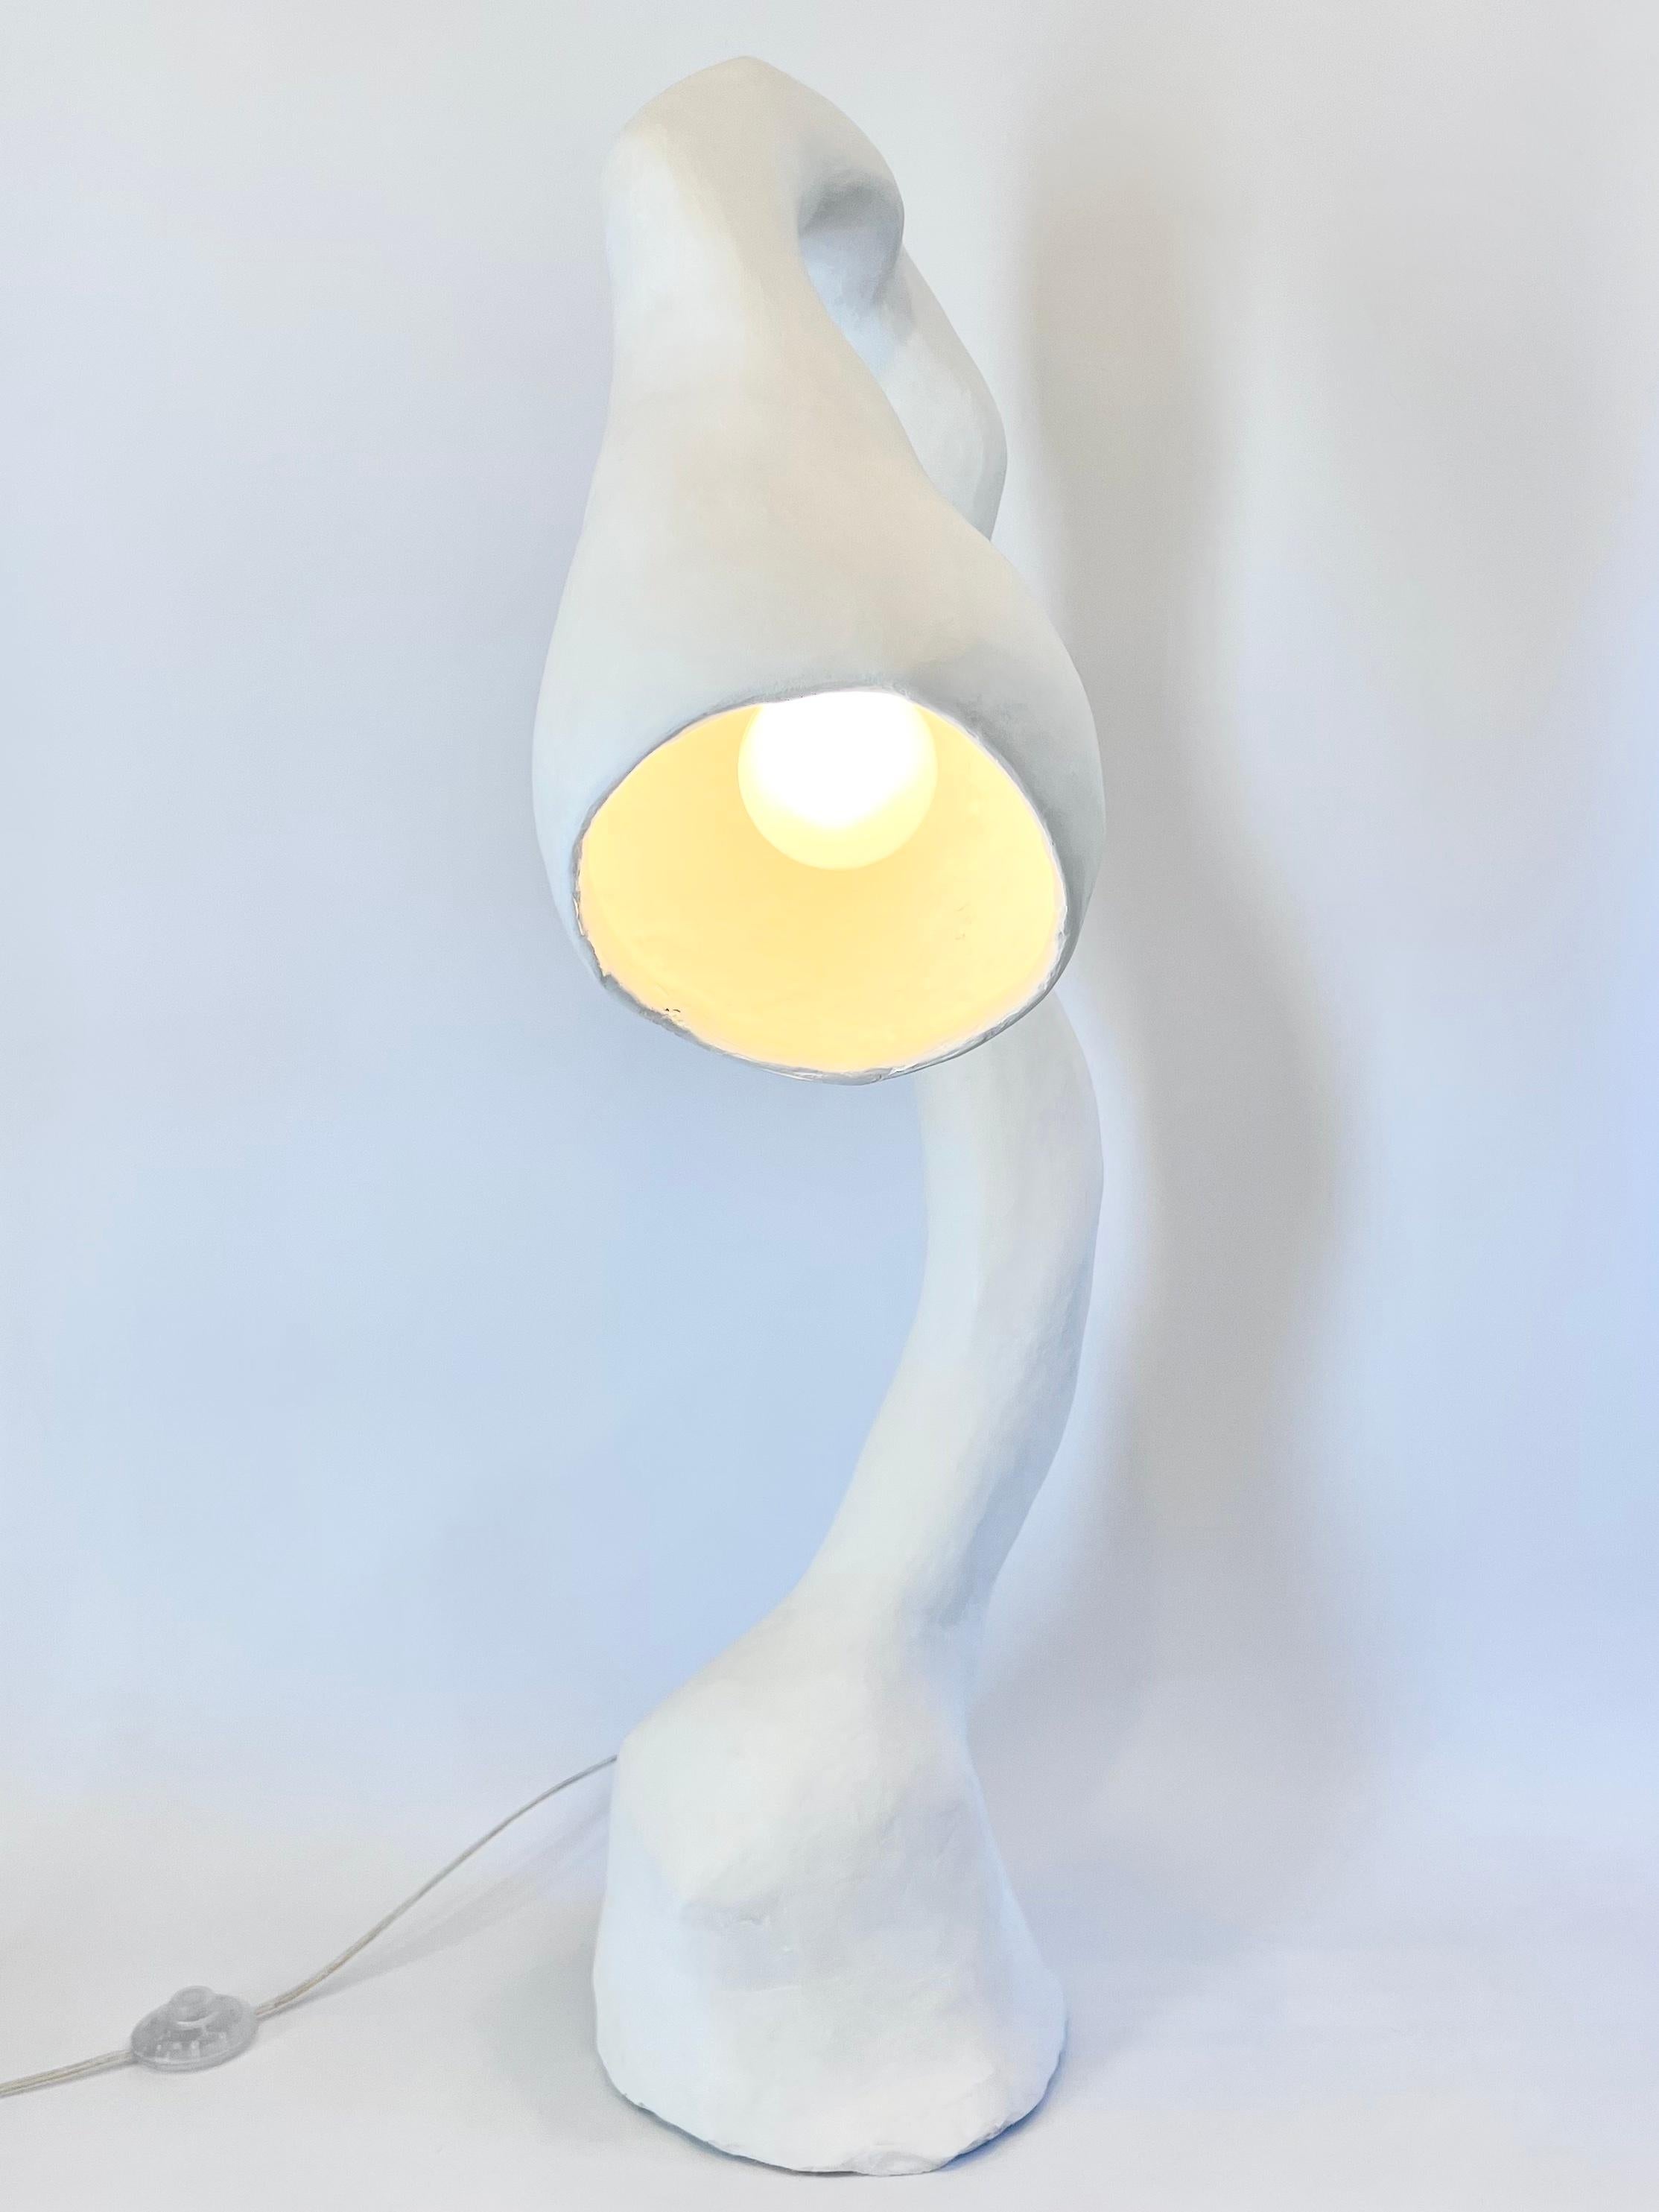 Biomorphic Floor Lamp N.5 by Studio Chora, Standing Light, White Stone, In Stock In New Condition For Sale In Albuquerque, NM